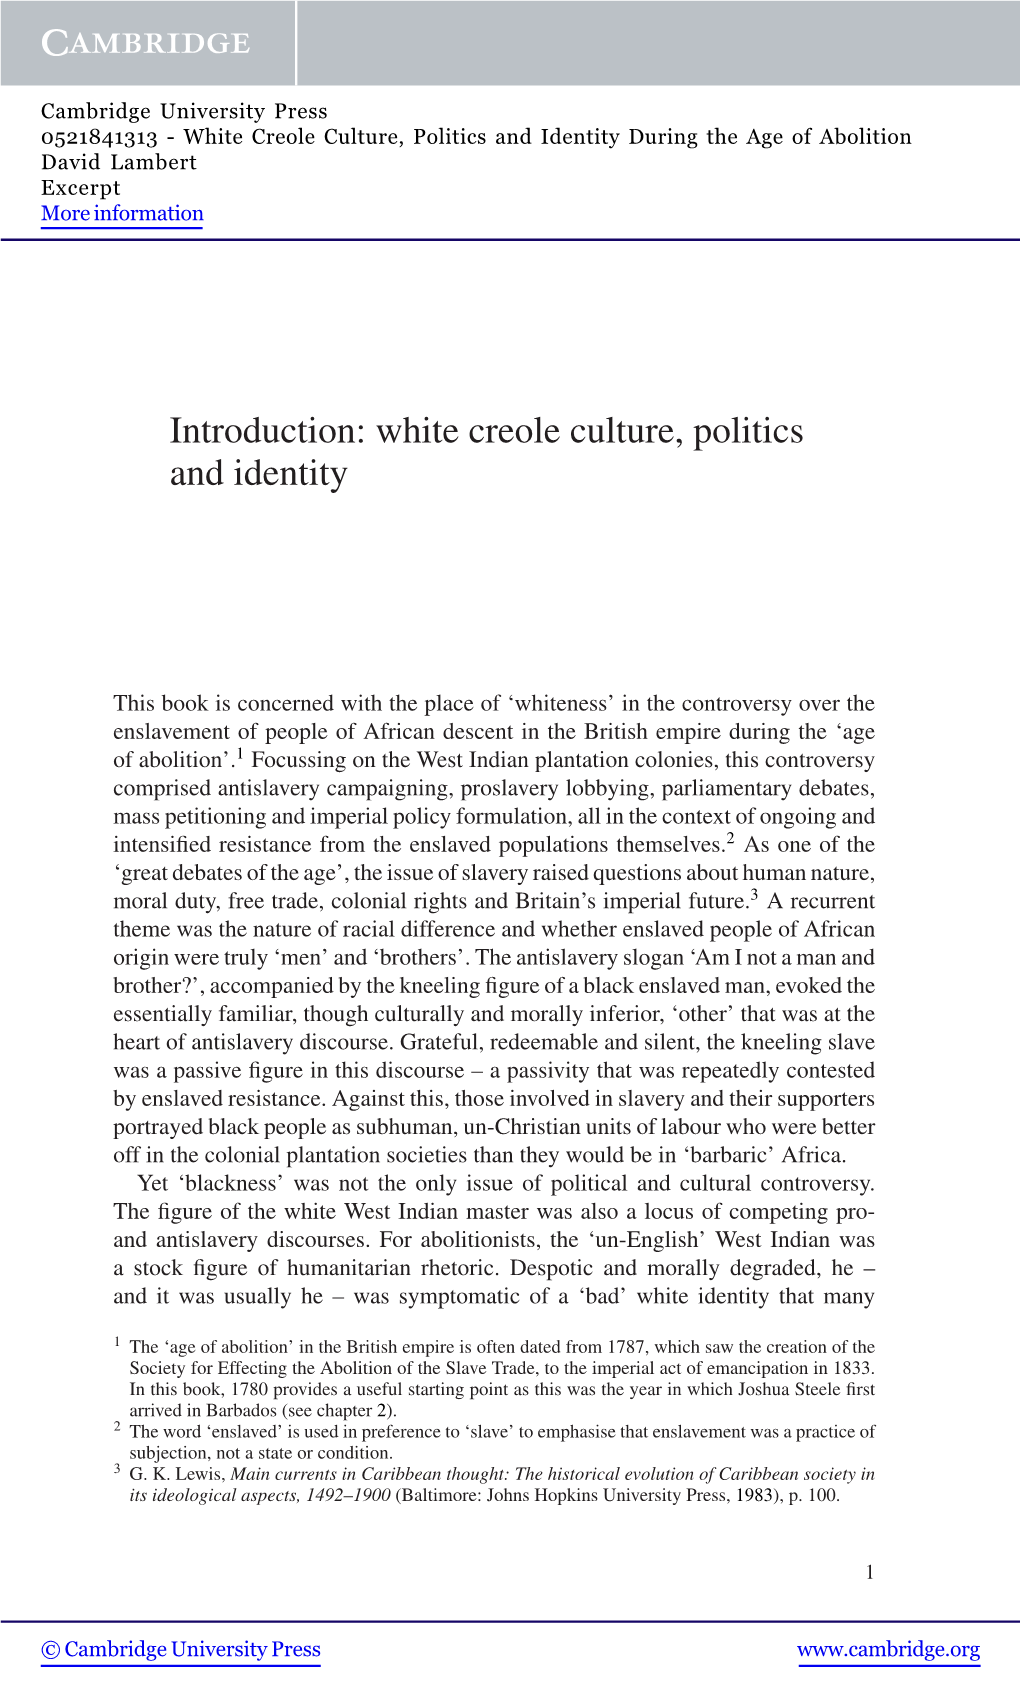 White Creole Culture, Politics and Identity During the Age of Abolition David Lambert Excerpt More Information